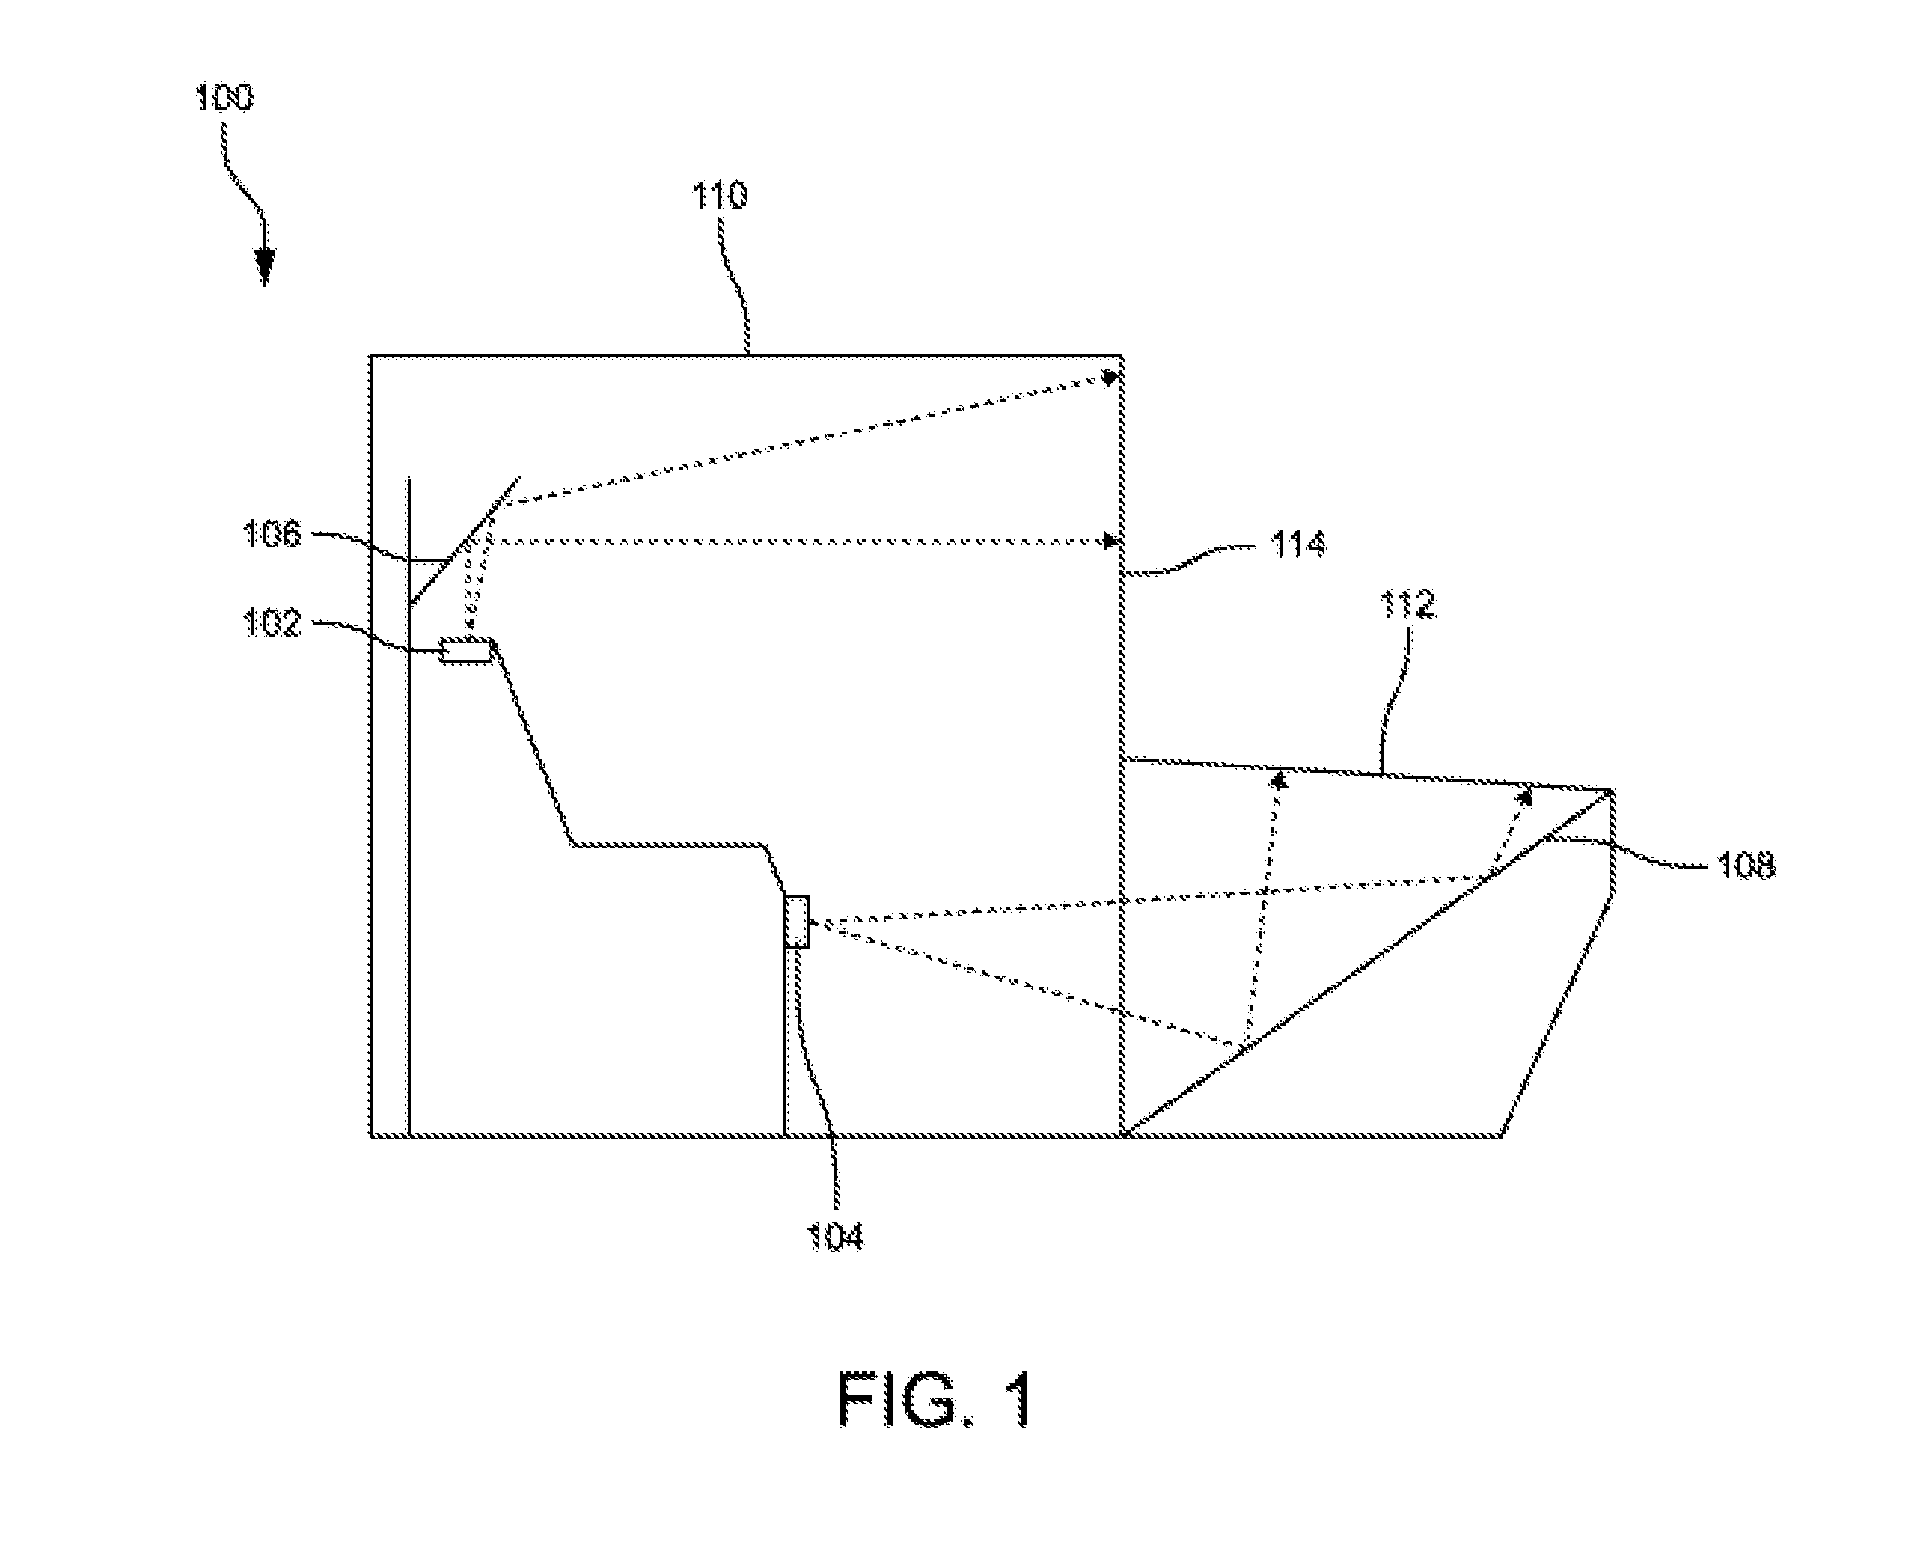 Flexible display device and computer with sensors and control approaches